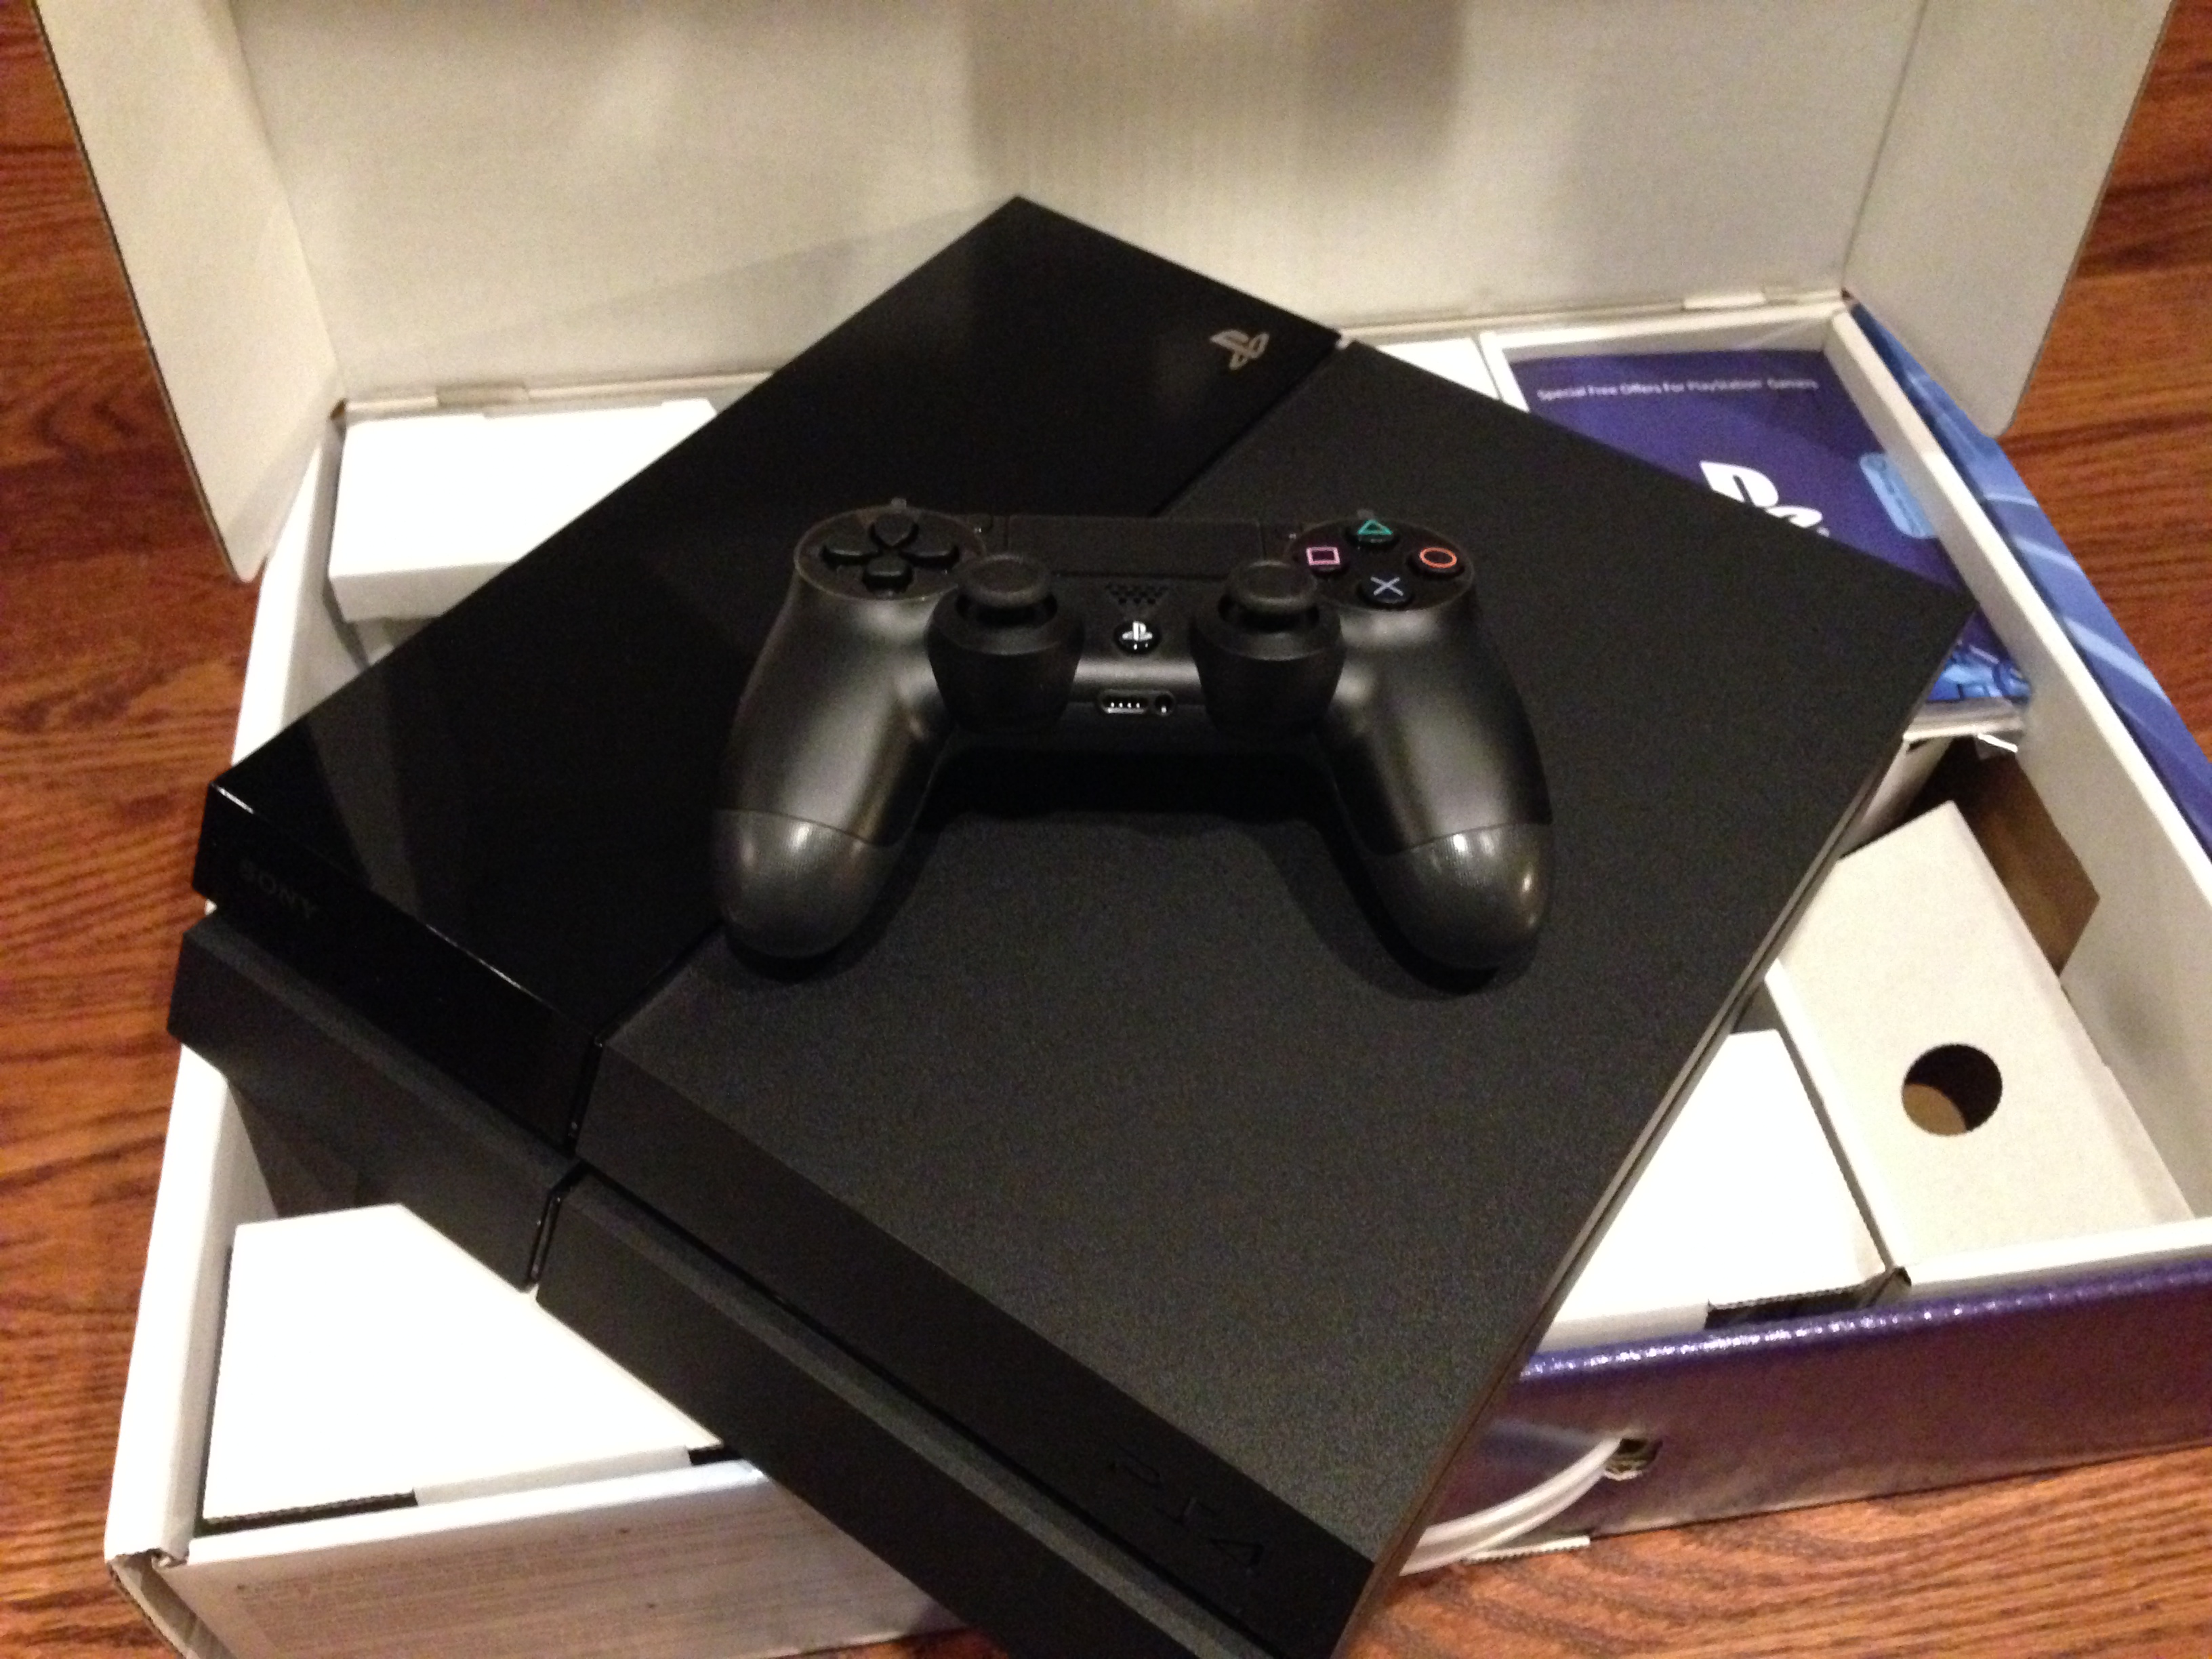 We unbox the PS4 and it's beautiful